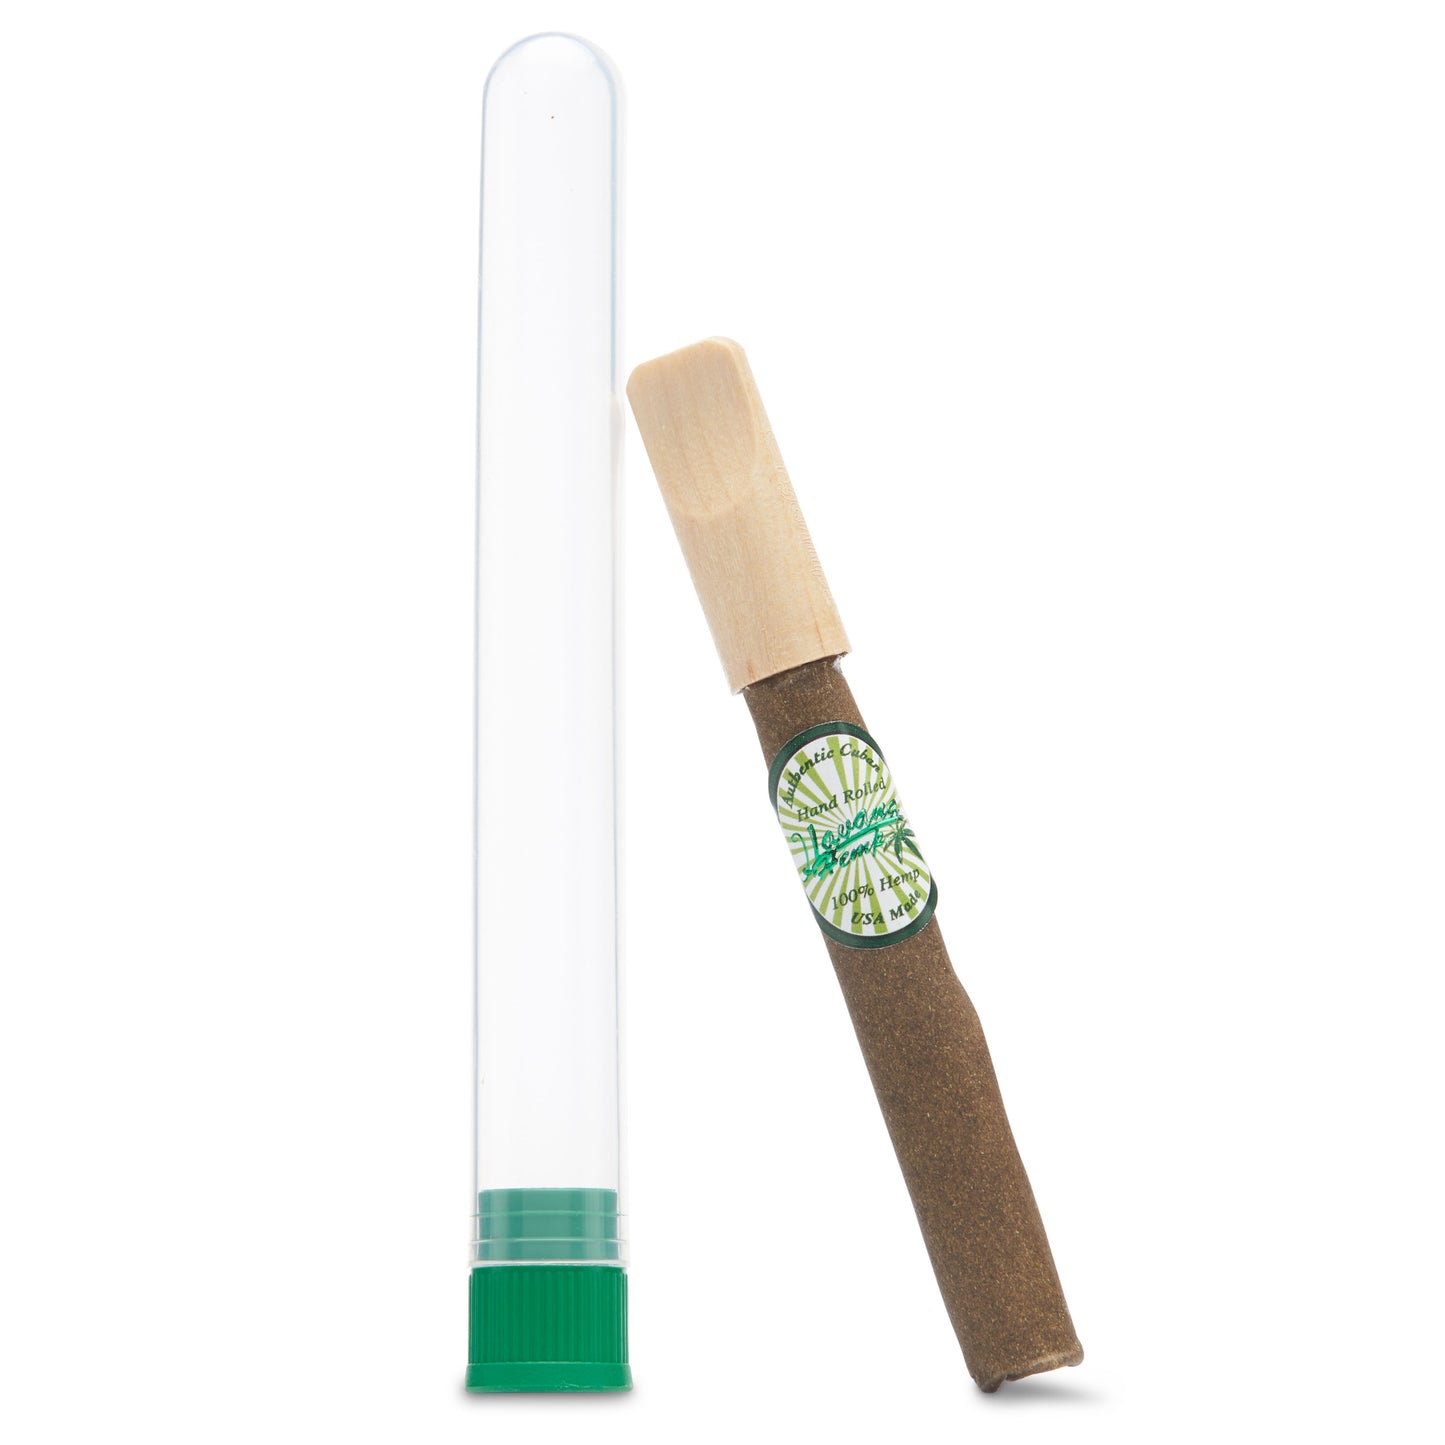 Hemp Cigarella Cigar with wooden tip  and hemp wrap rolled in Little Havana Miami by seasoned cigar rollers packaged in a clear reusable waterproof and smell proof tube.  No tobacco!